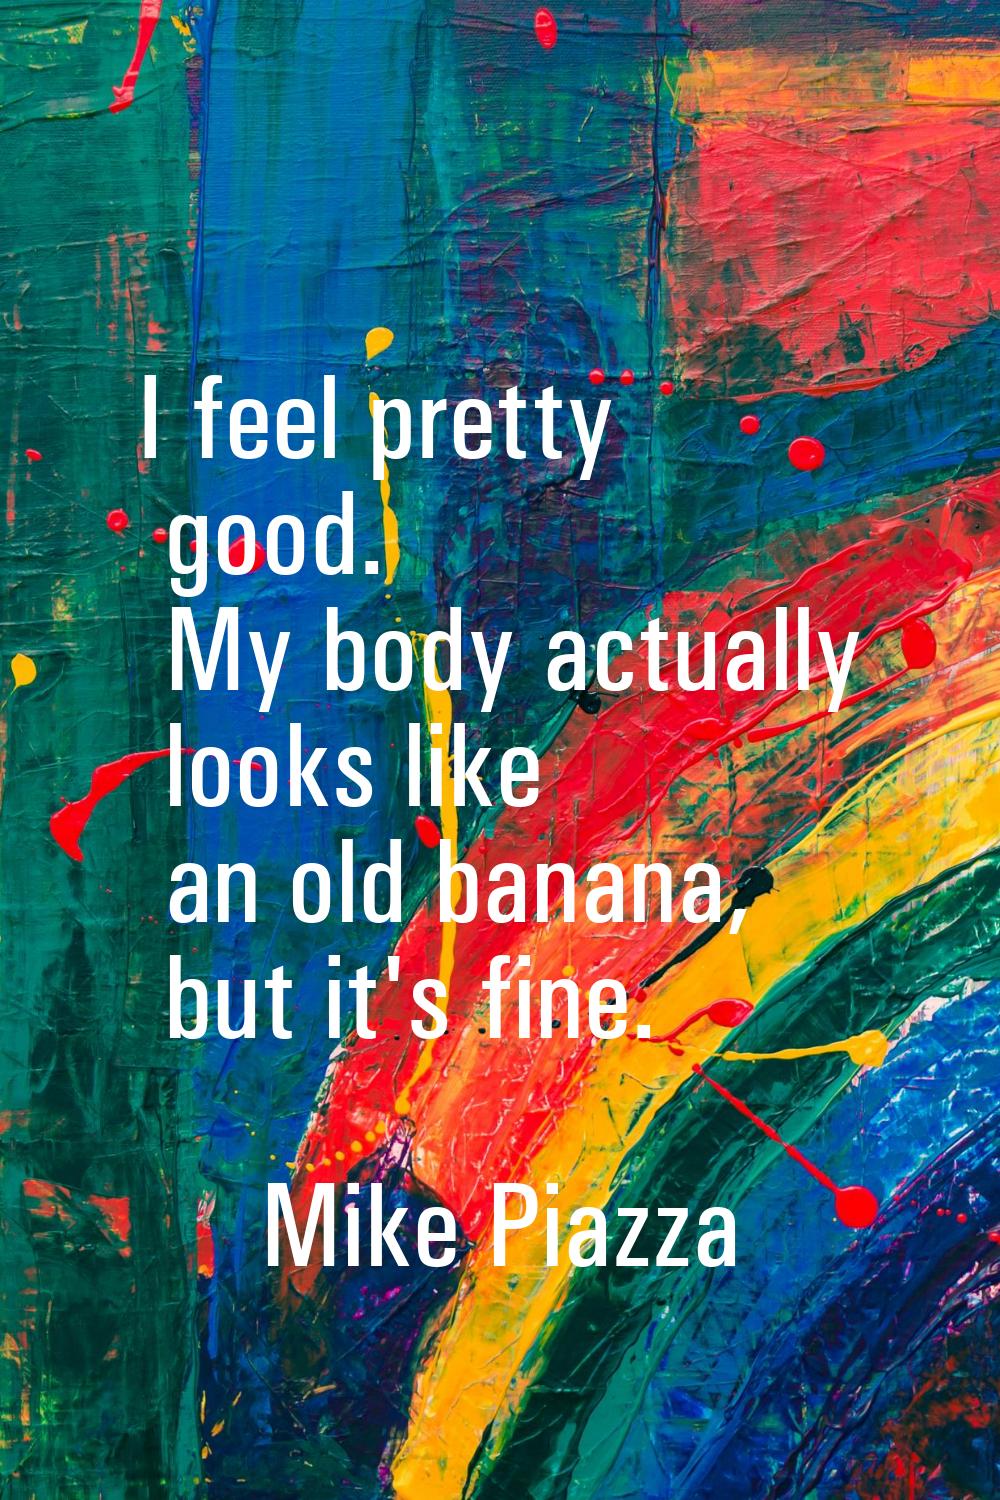 I feel pretty good. My body actually looks like an old banana, but it's fine.